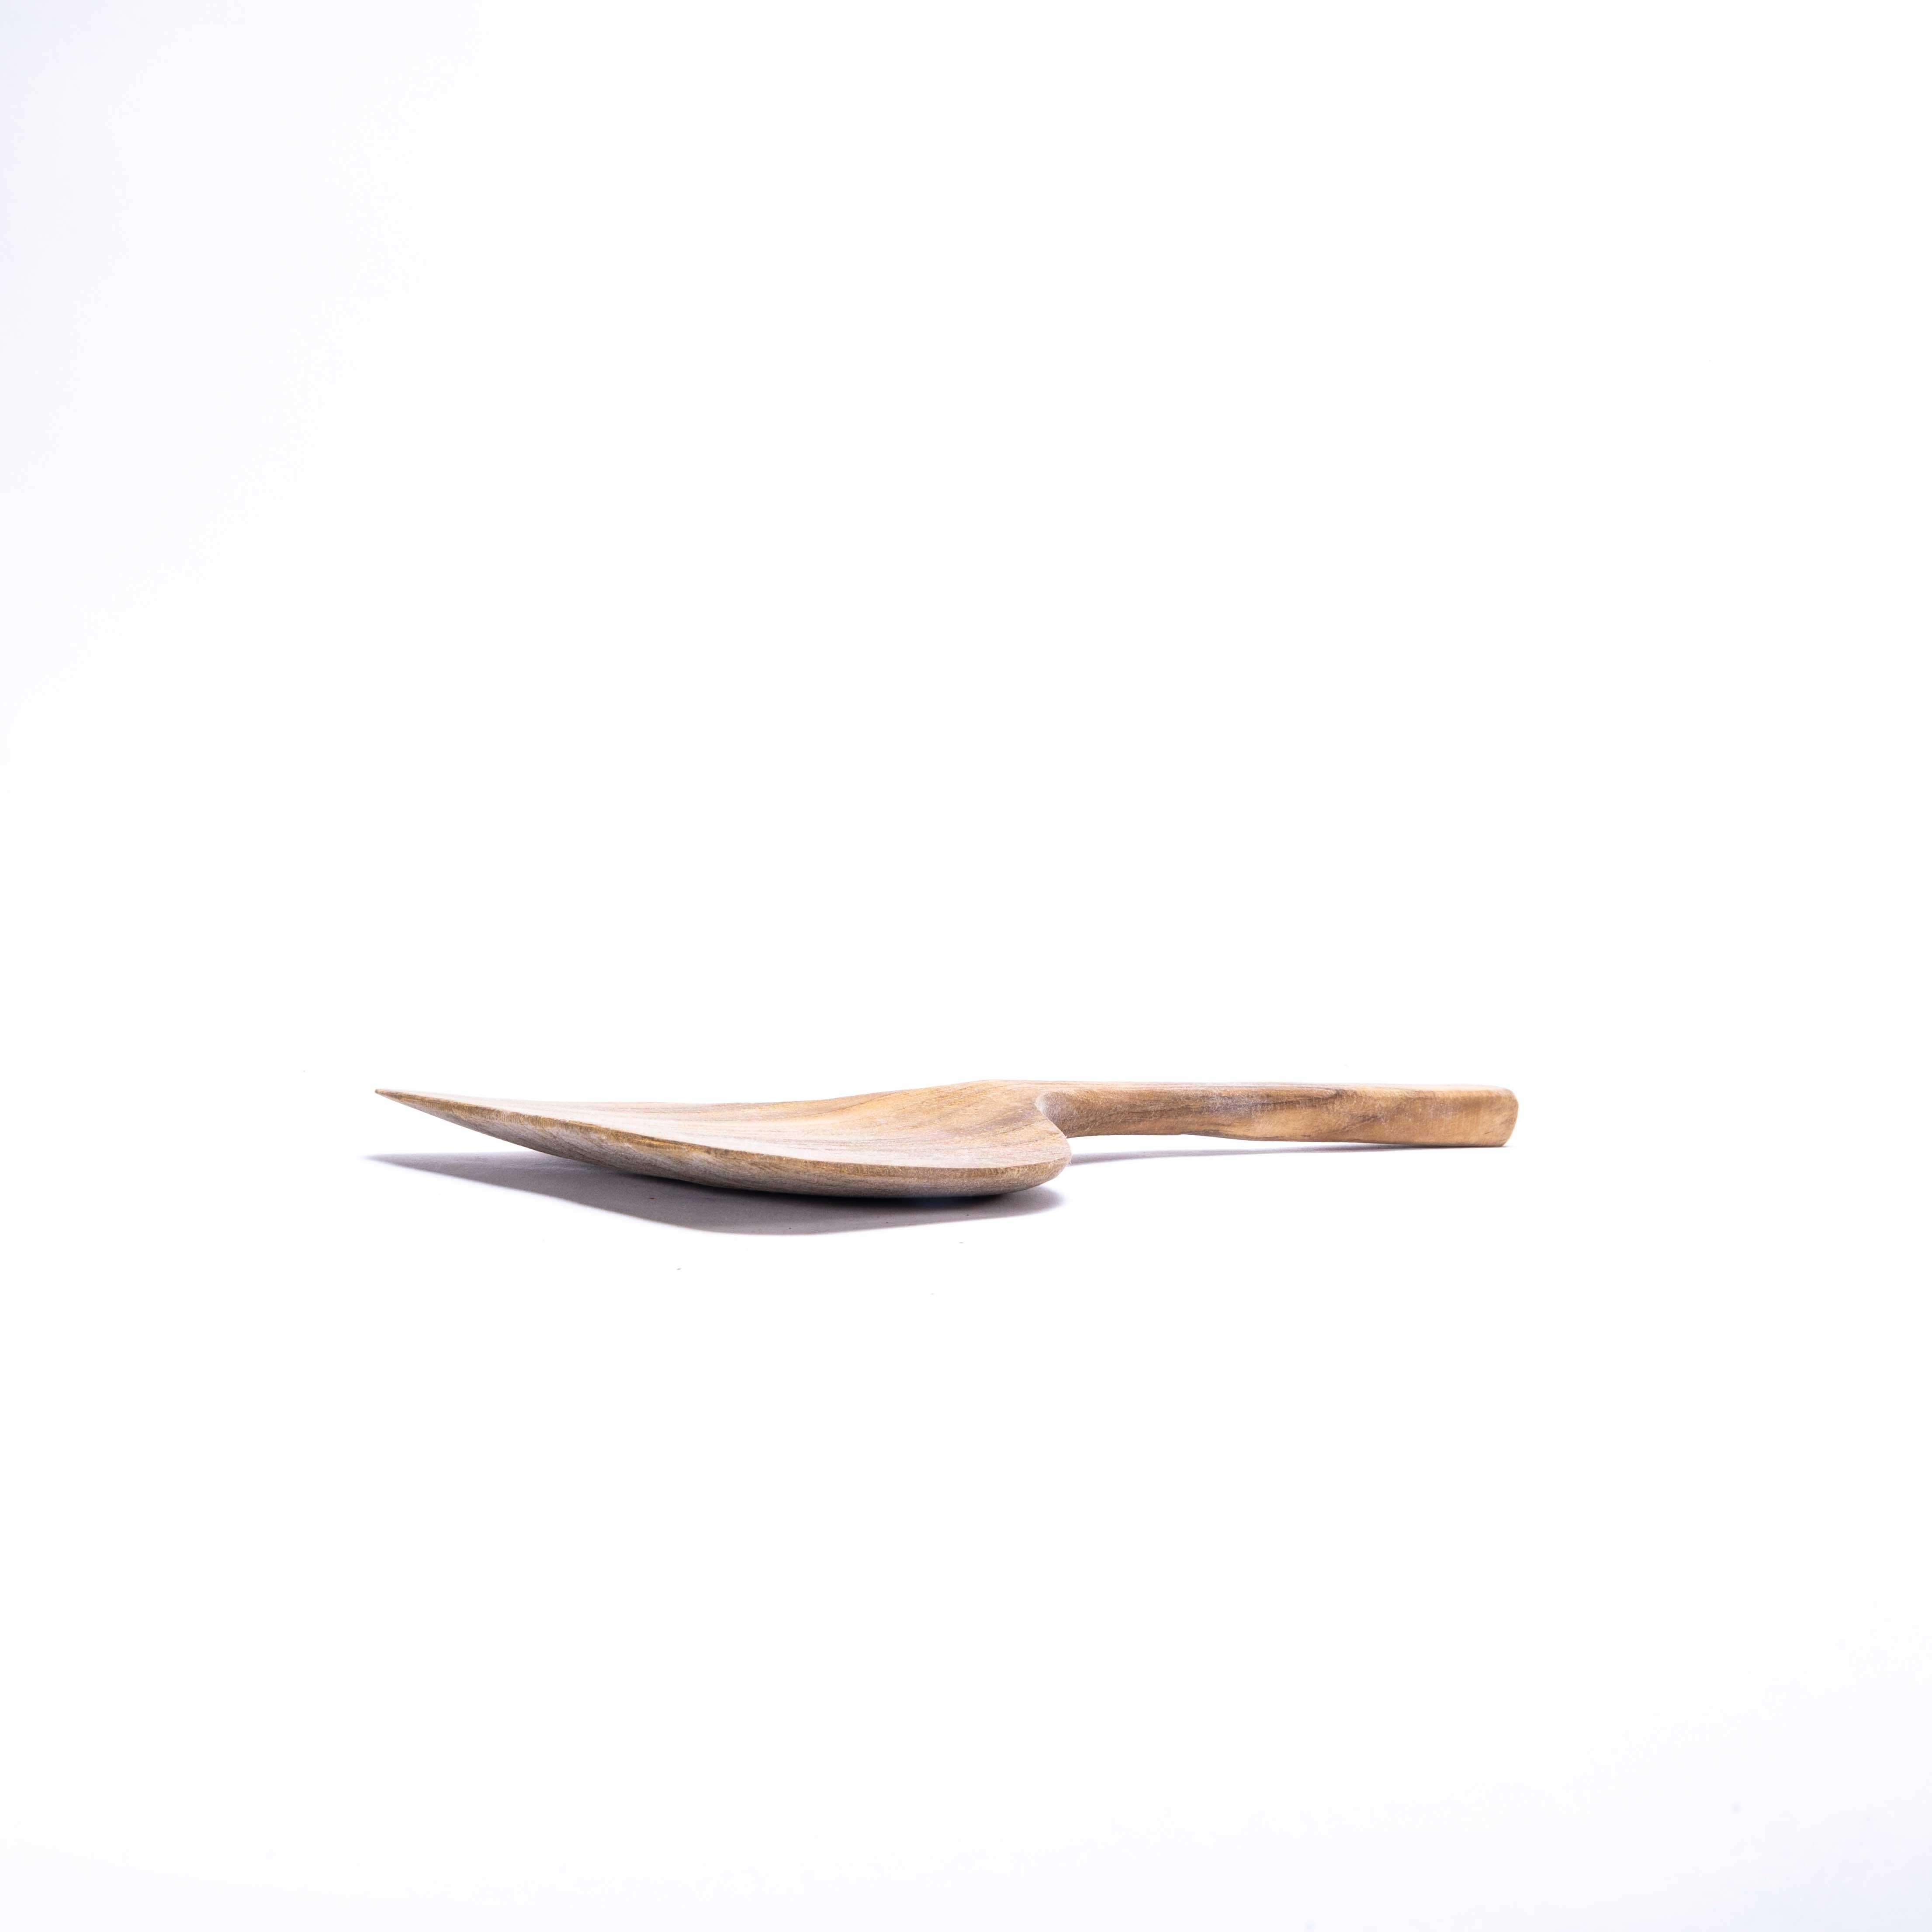 Contemporary Hand Carved Indonesian Salad Servers – Pair
Contemporary Hand Carved Indonesian Salad Servers. Hand made in Indonesia using locally sourced FSC certified teak, the listing is for a pair.

WORKSHOP REPORT
Our workshop team inspect every